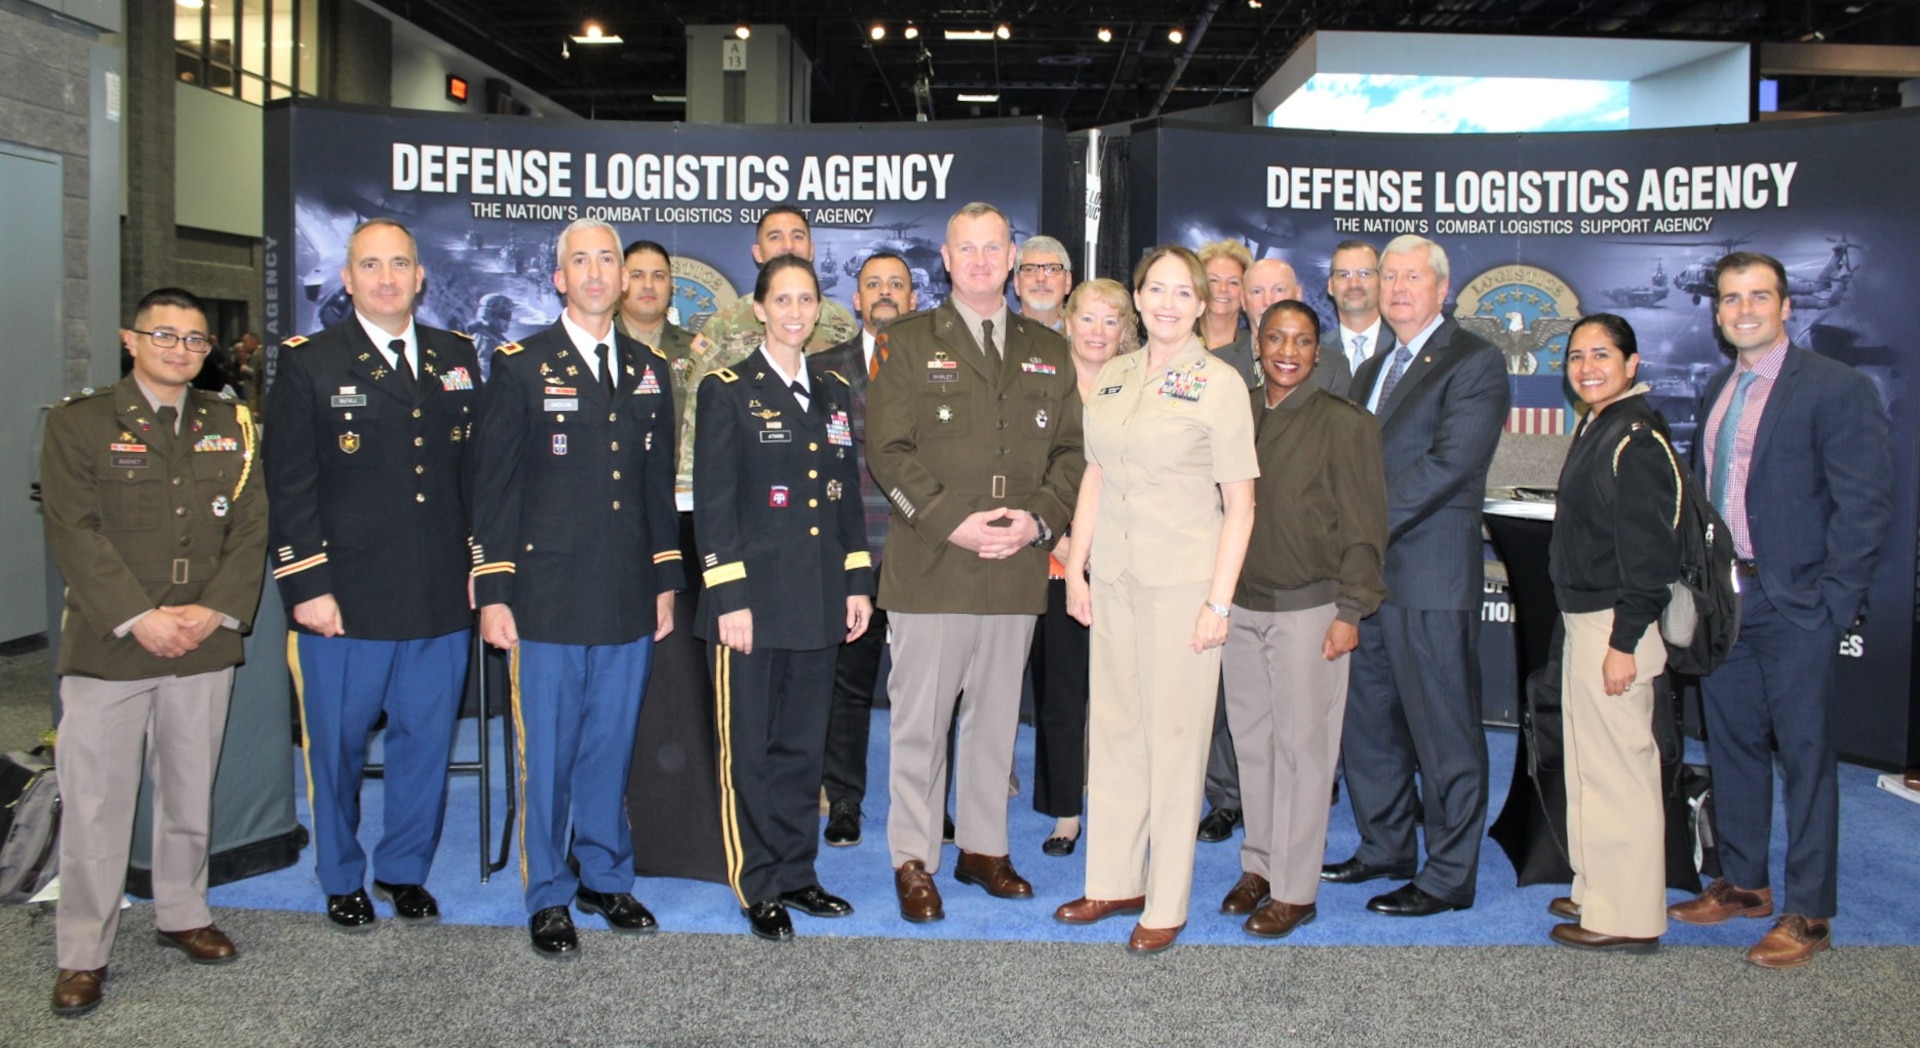 A group of DLA employees pose for a photo.